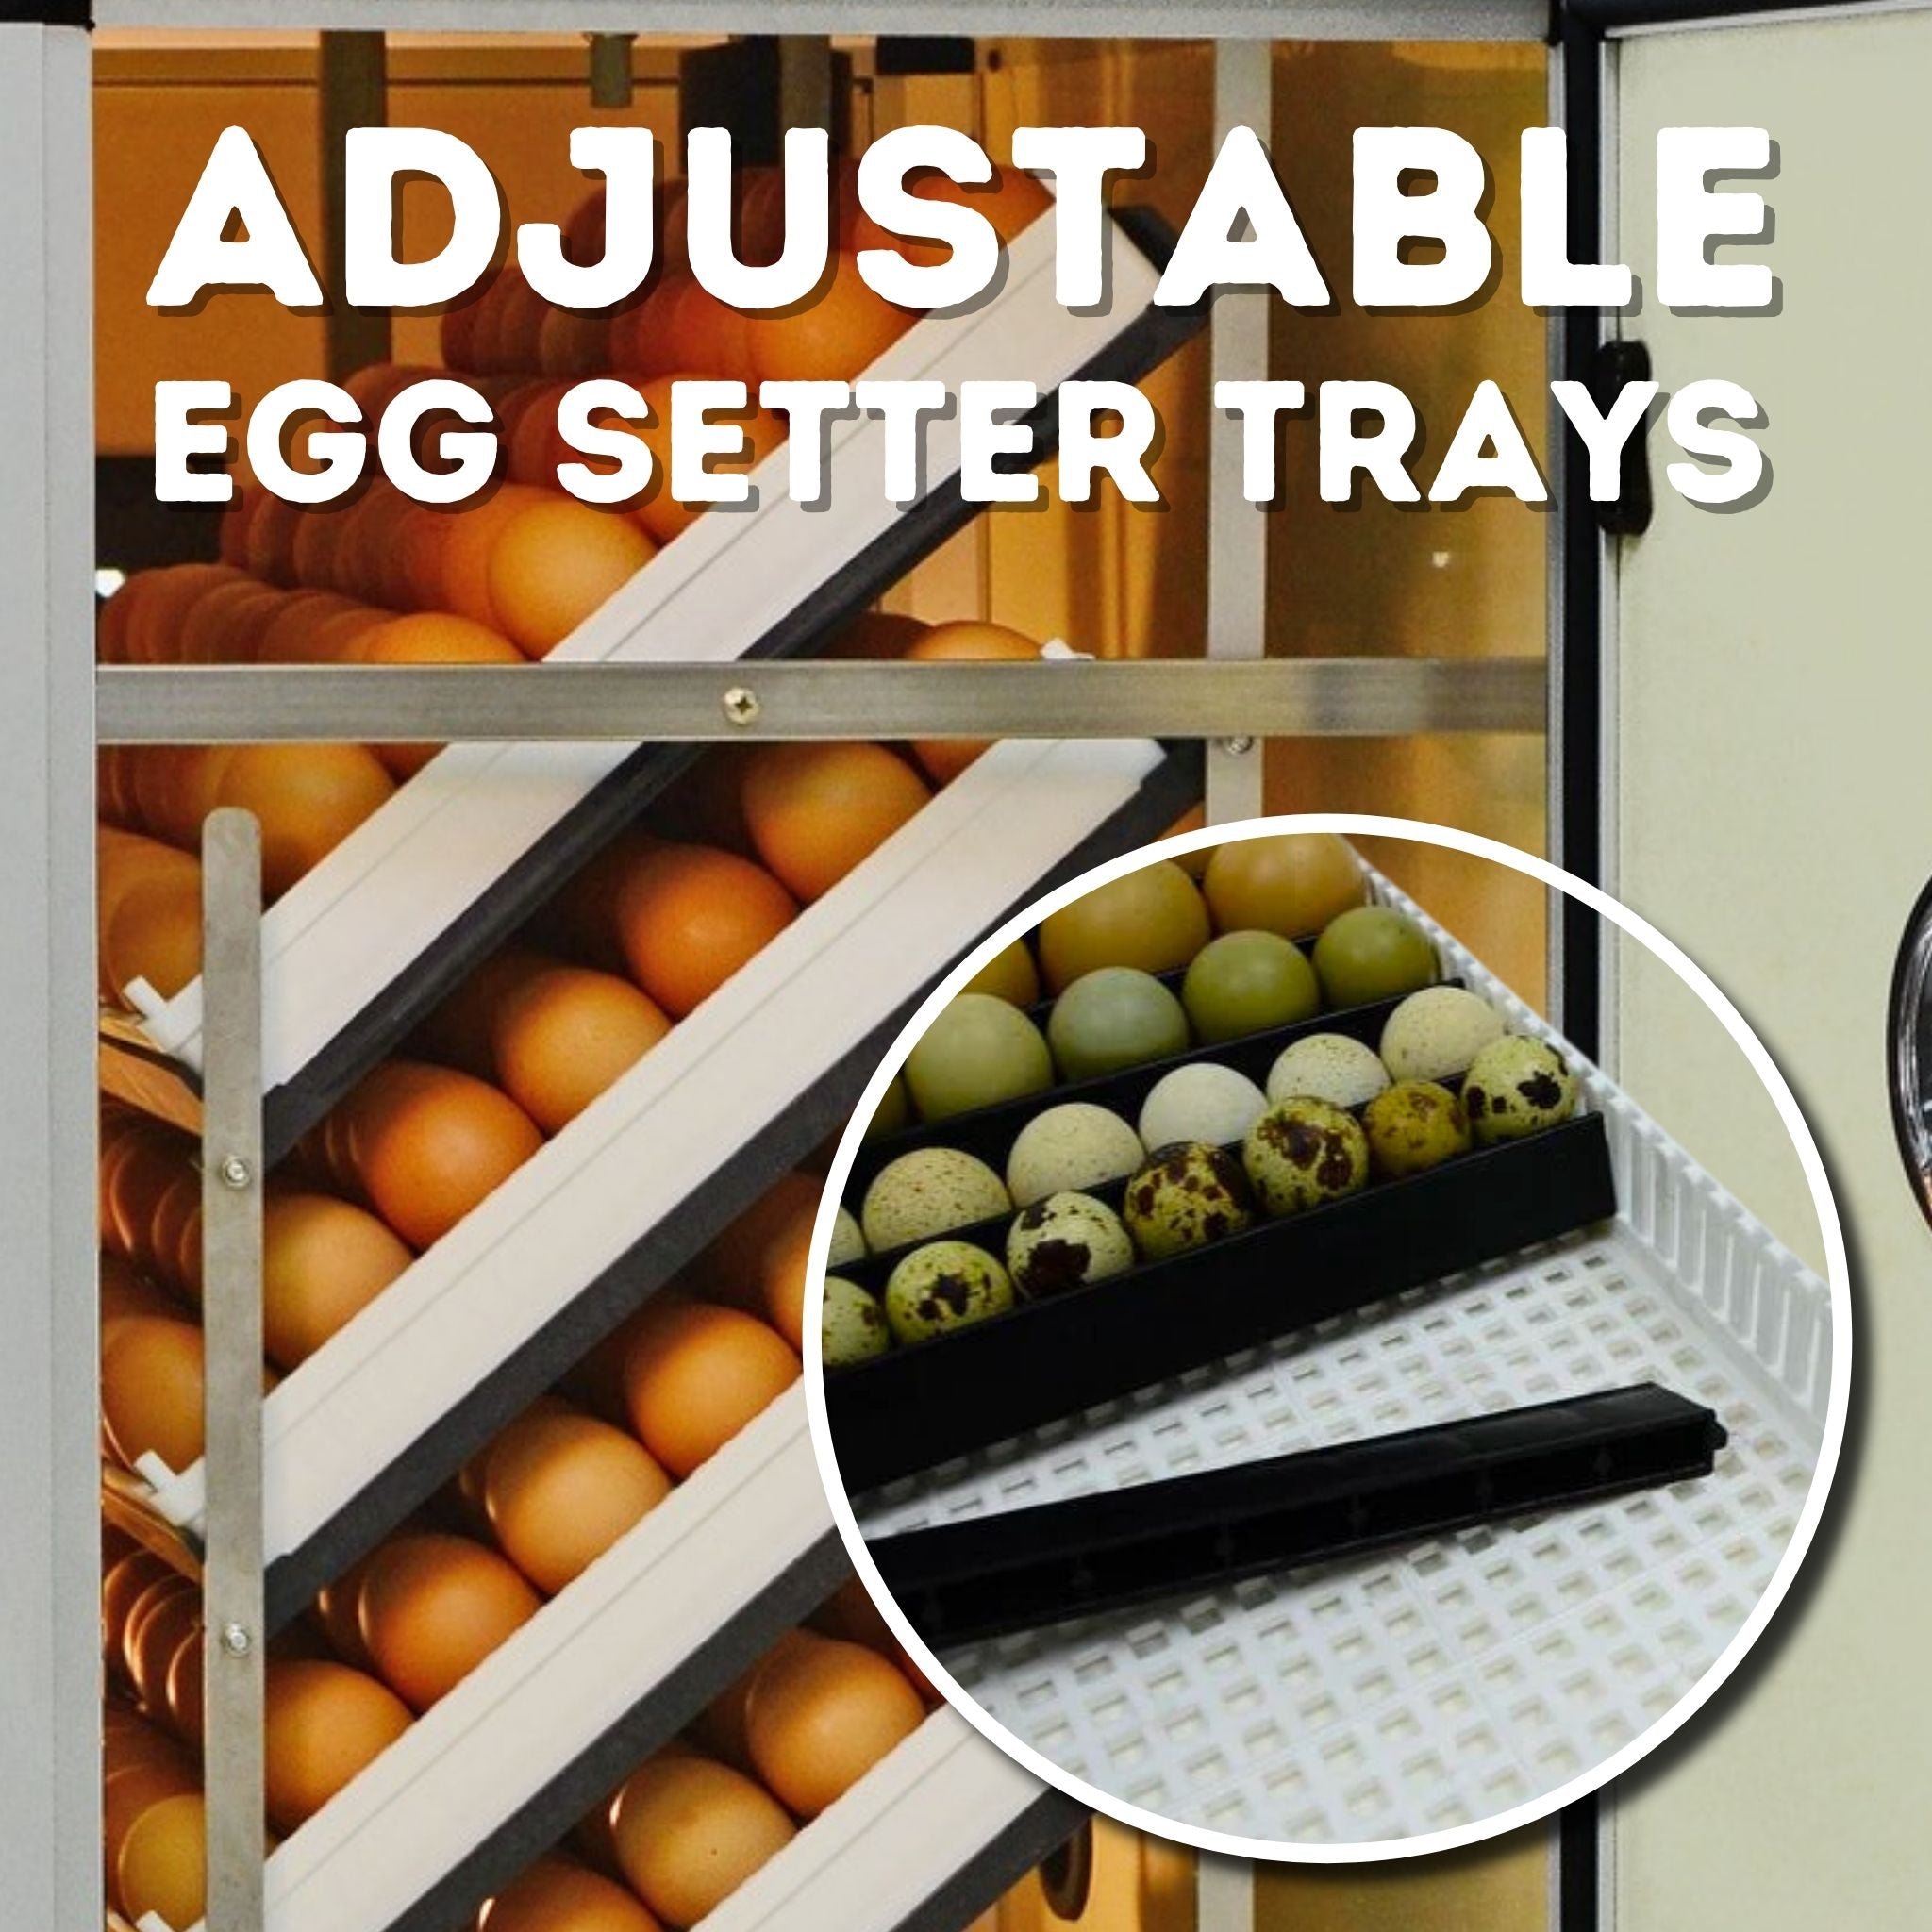 Hatching Time Cimuka. Image shows highlight of adjustable egg setter trays. Various types of eggs can be seen in image such as quail and chicken eggs on the same tray.